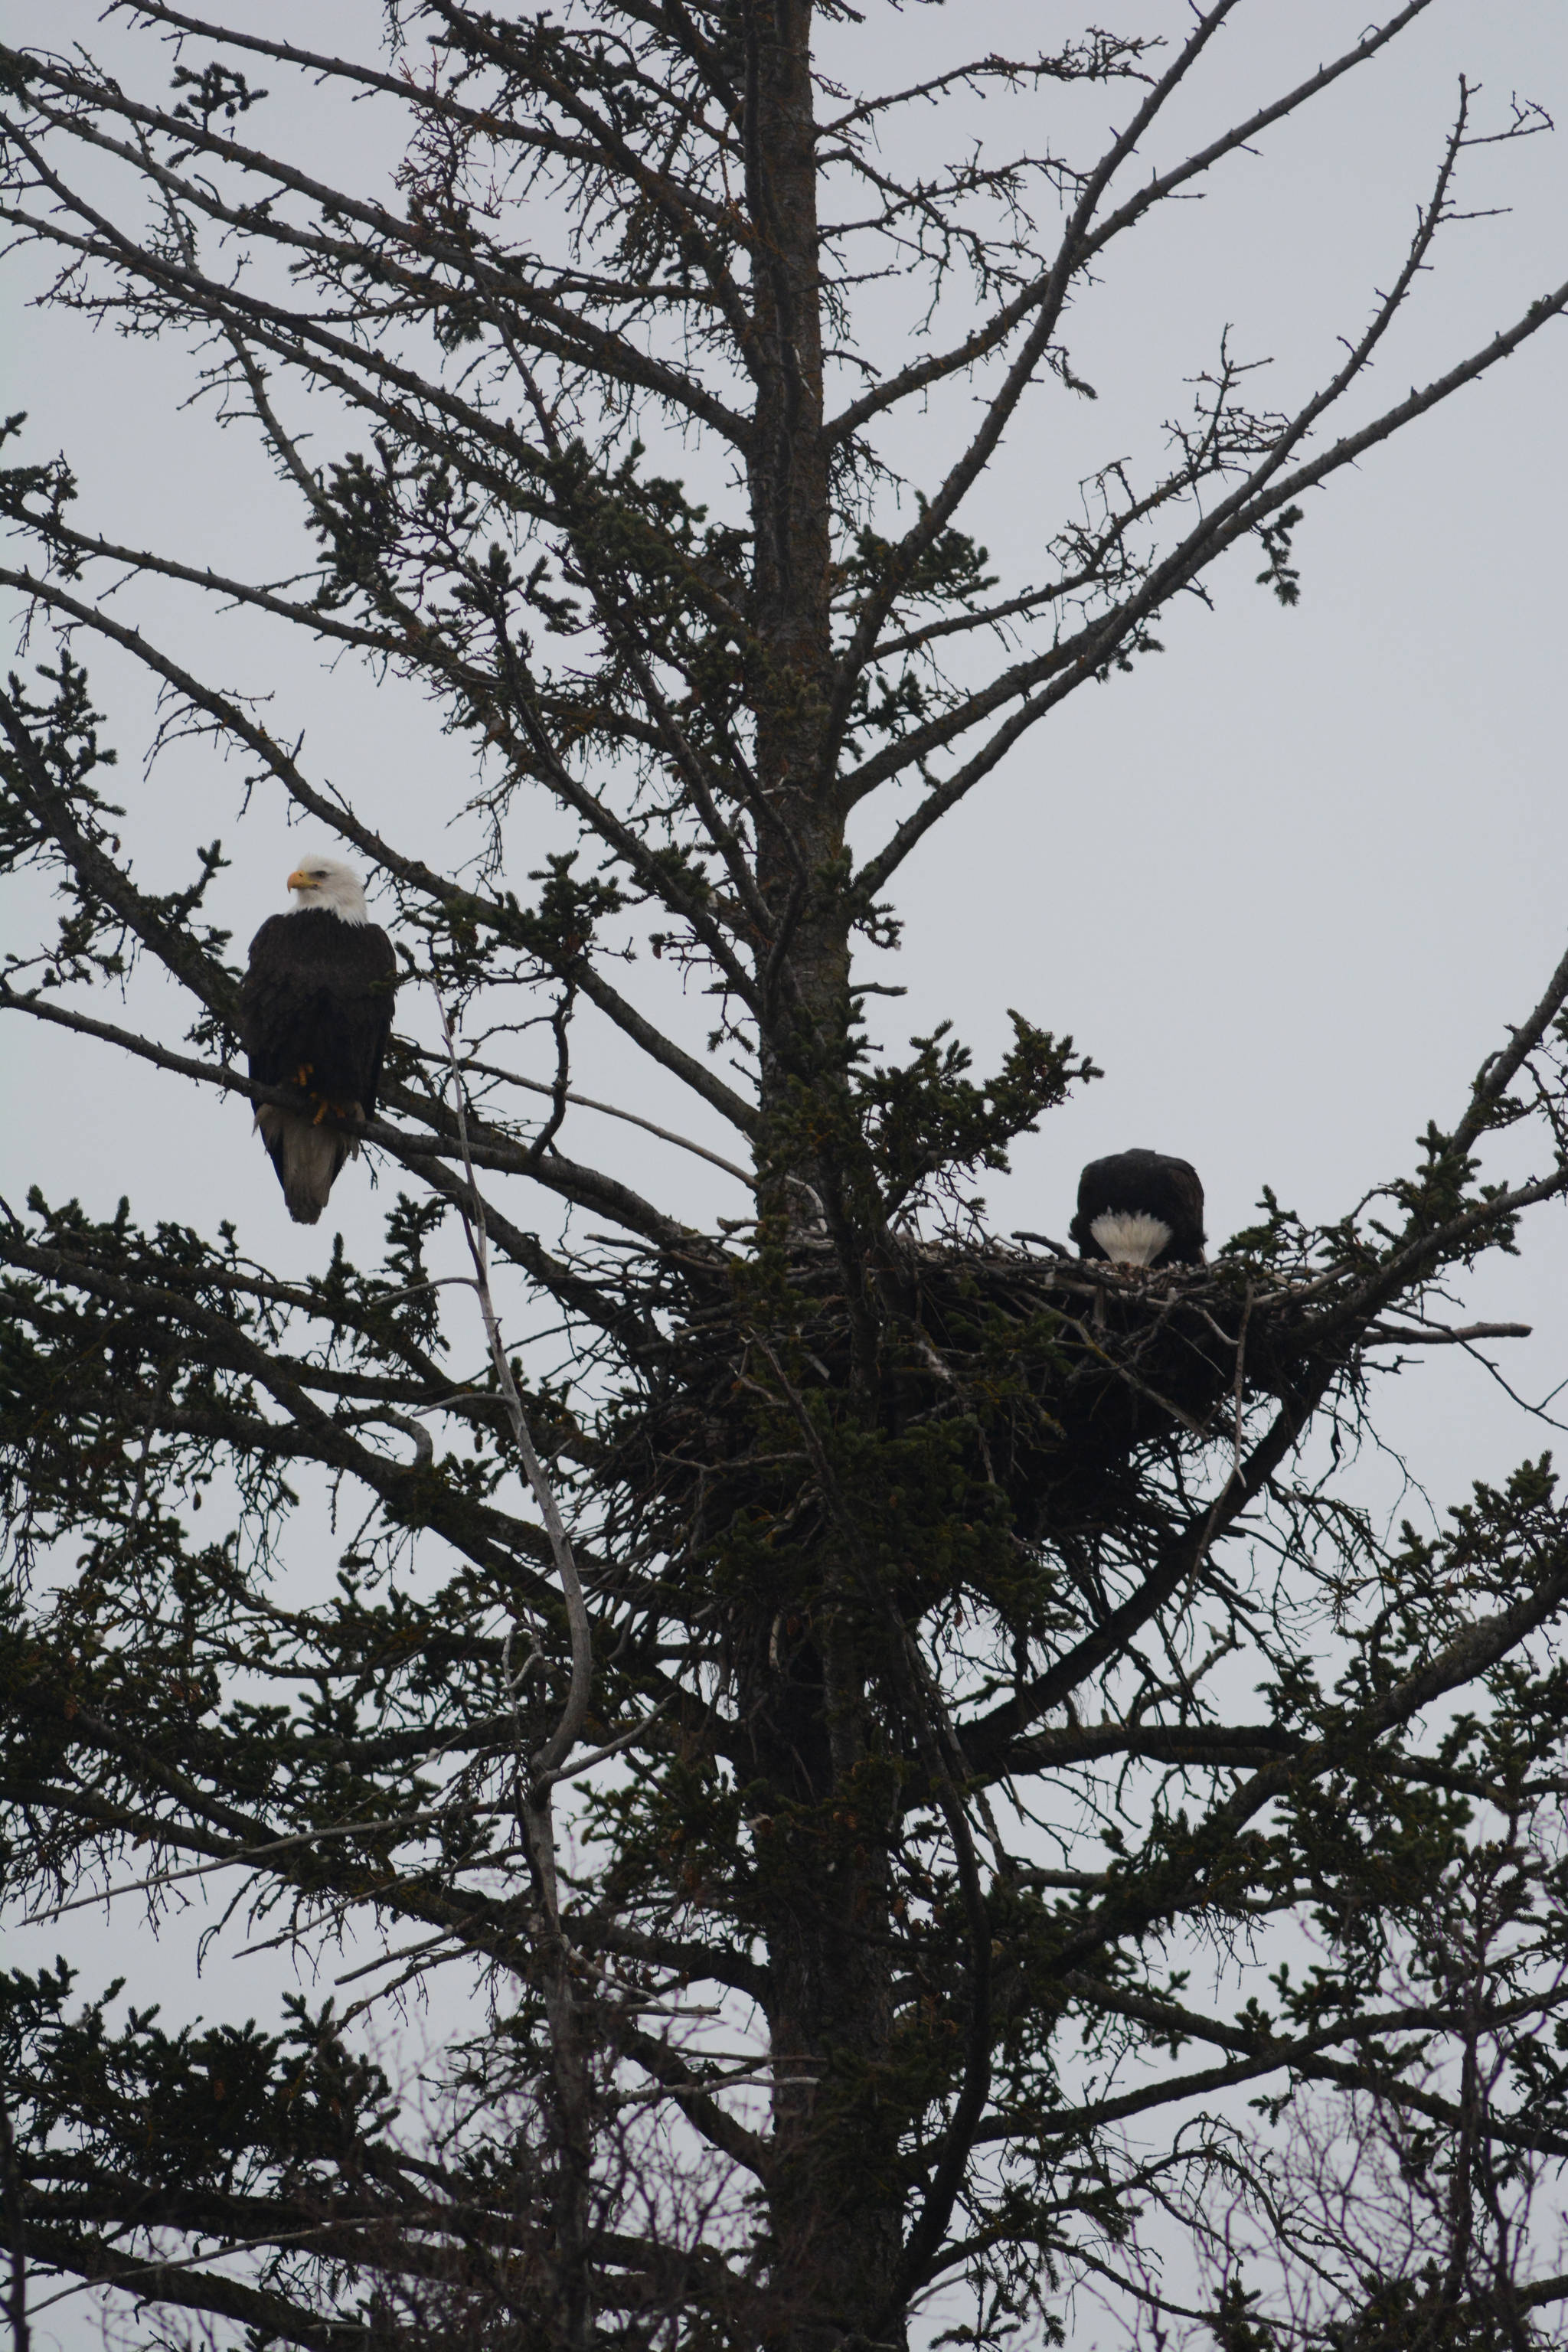 Great view, good location A pair of bald eagles sit in a nest near the Lake Street and Bypass stoplight. Since 2010, a pair of bald eagles has nested in the area near Beluga Slough. The first nest was destroyed when the tree fell down in a winter storm, but over the years eagles have built nests near the slough and in a stand of trees across from the Homer Post Office. (Photo by Michael Armstrong/Homer News)